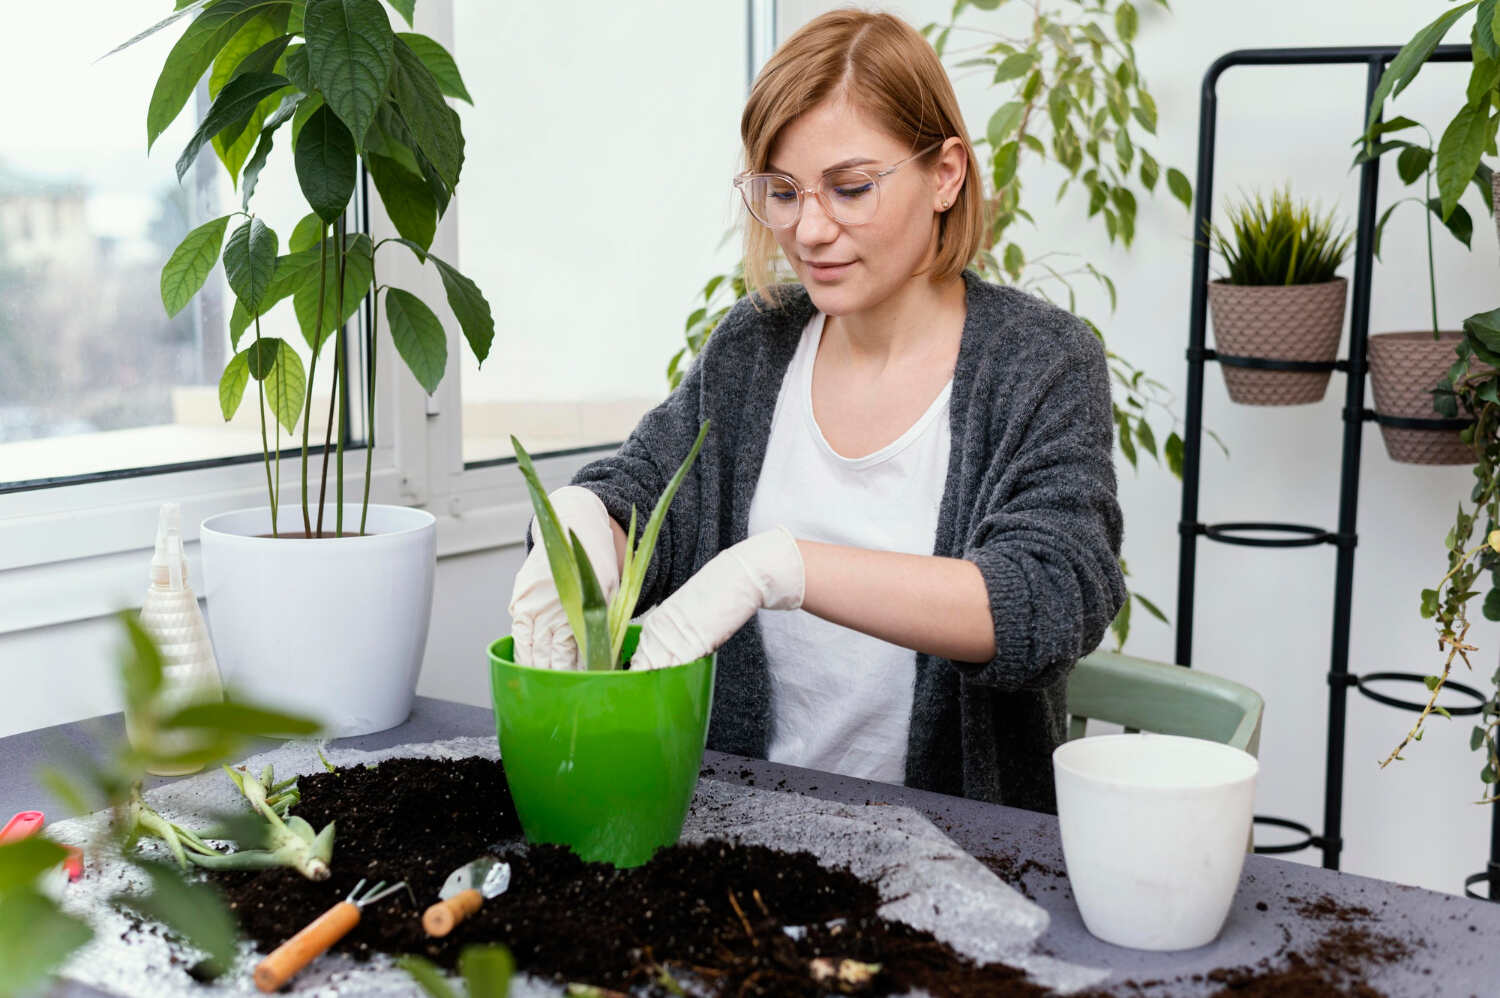 The Therapeutic Benefits of Gardening as an Alternative to Traditional Therapy